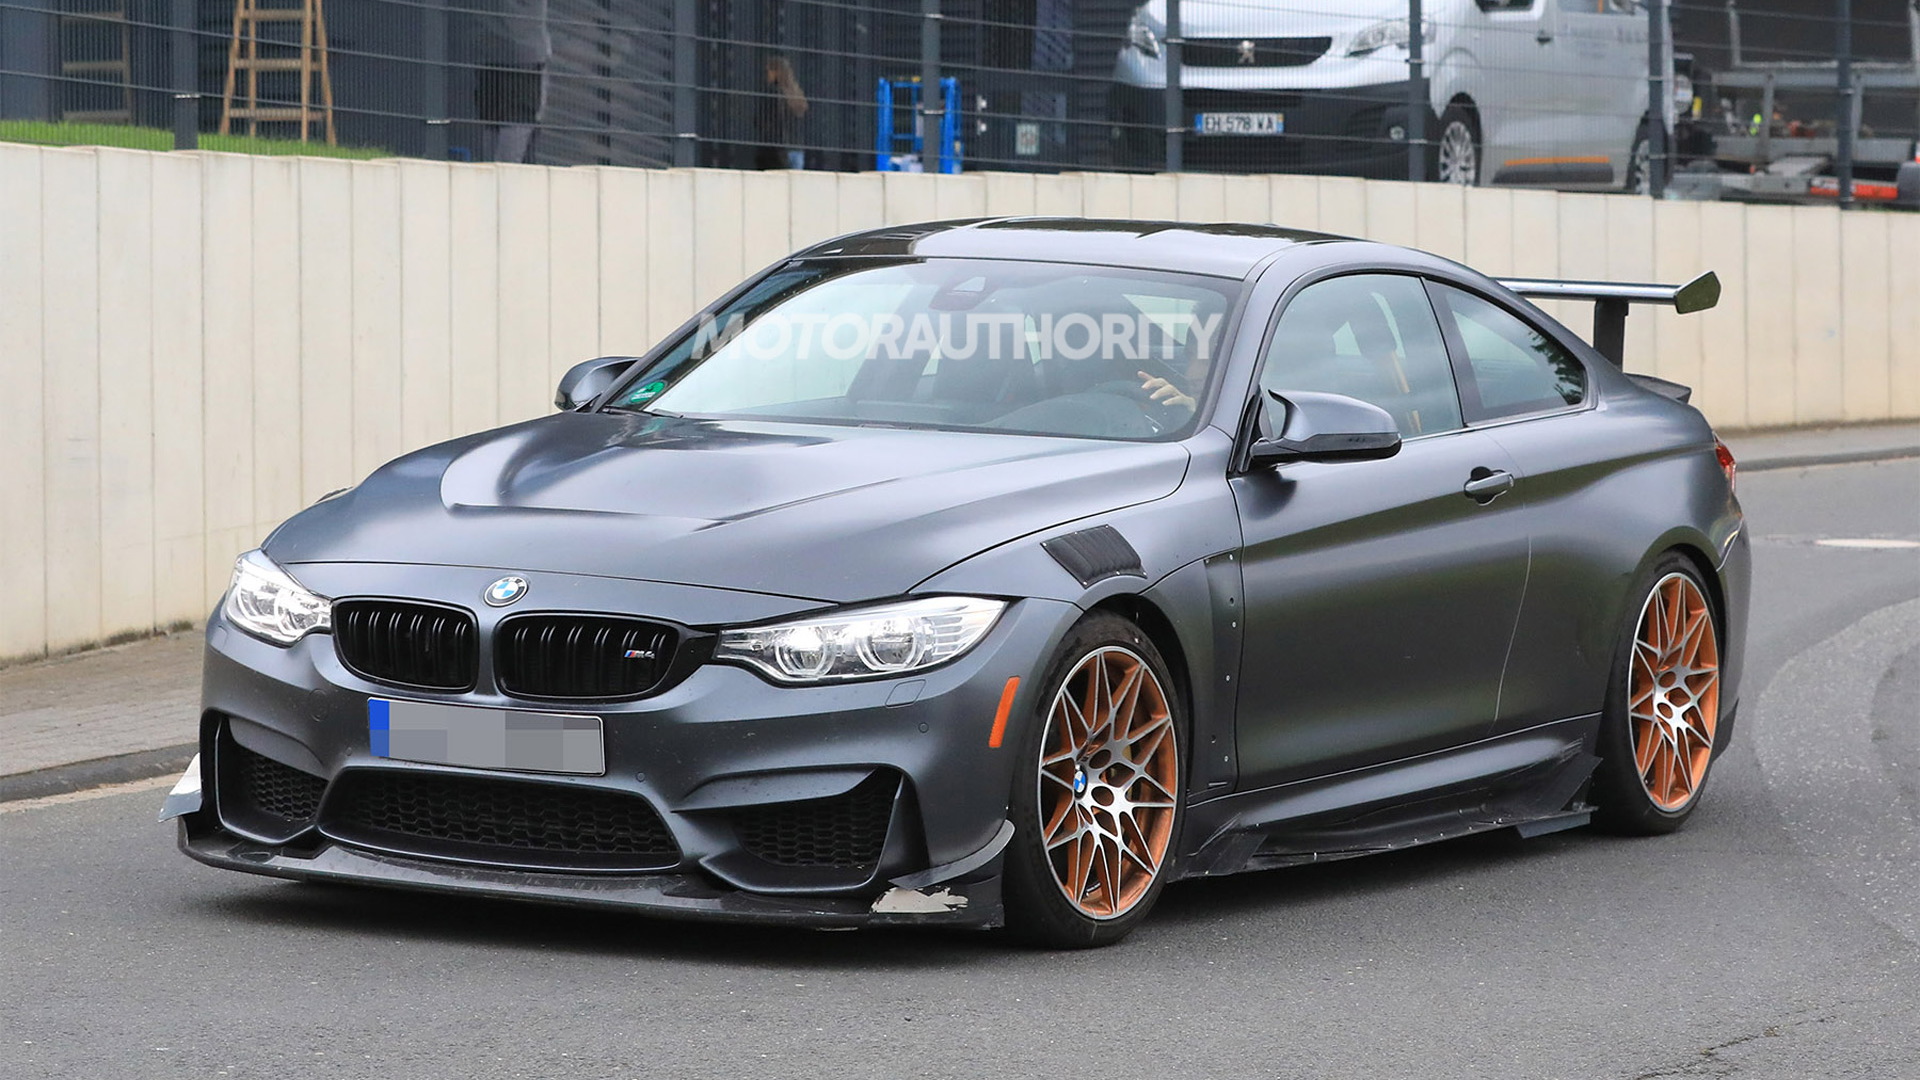 Spy shots and video of possible BMW M4 CSL